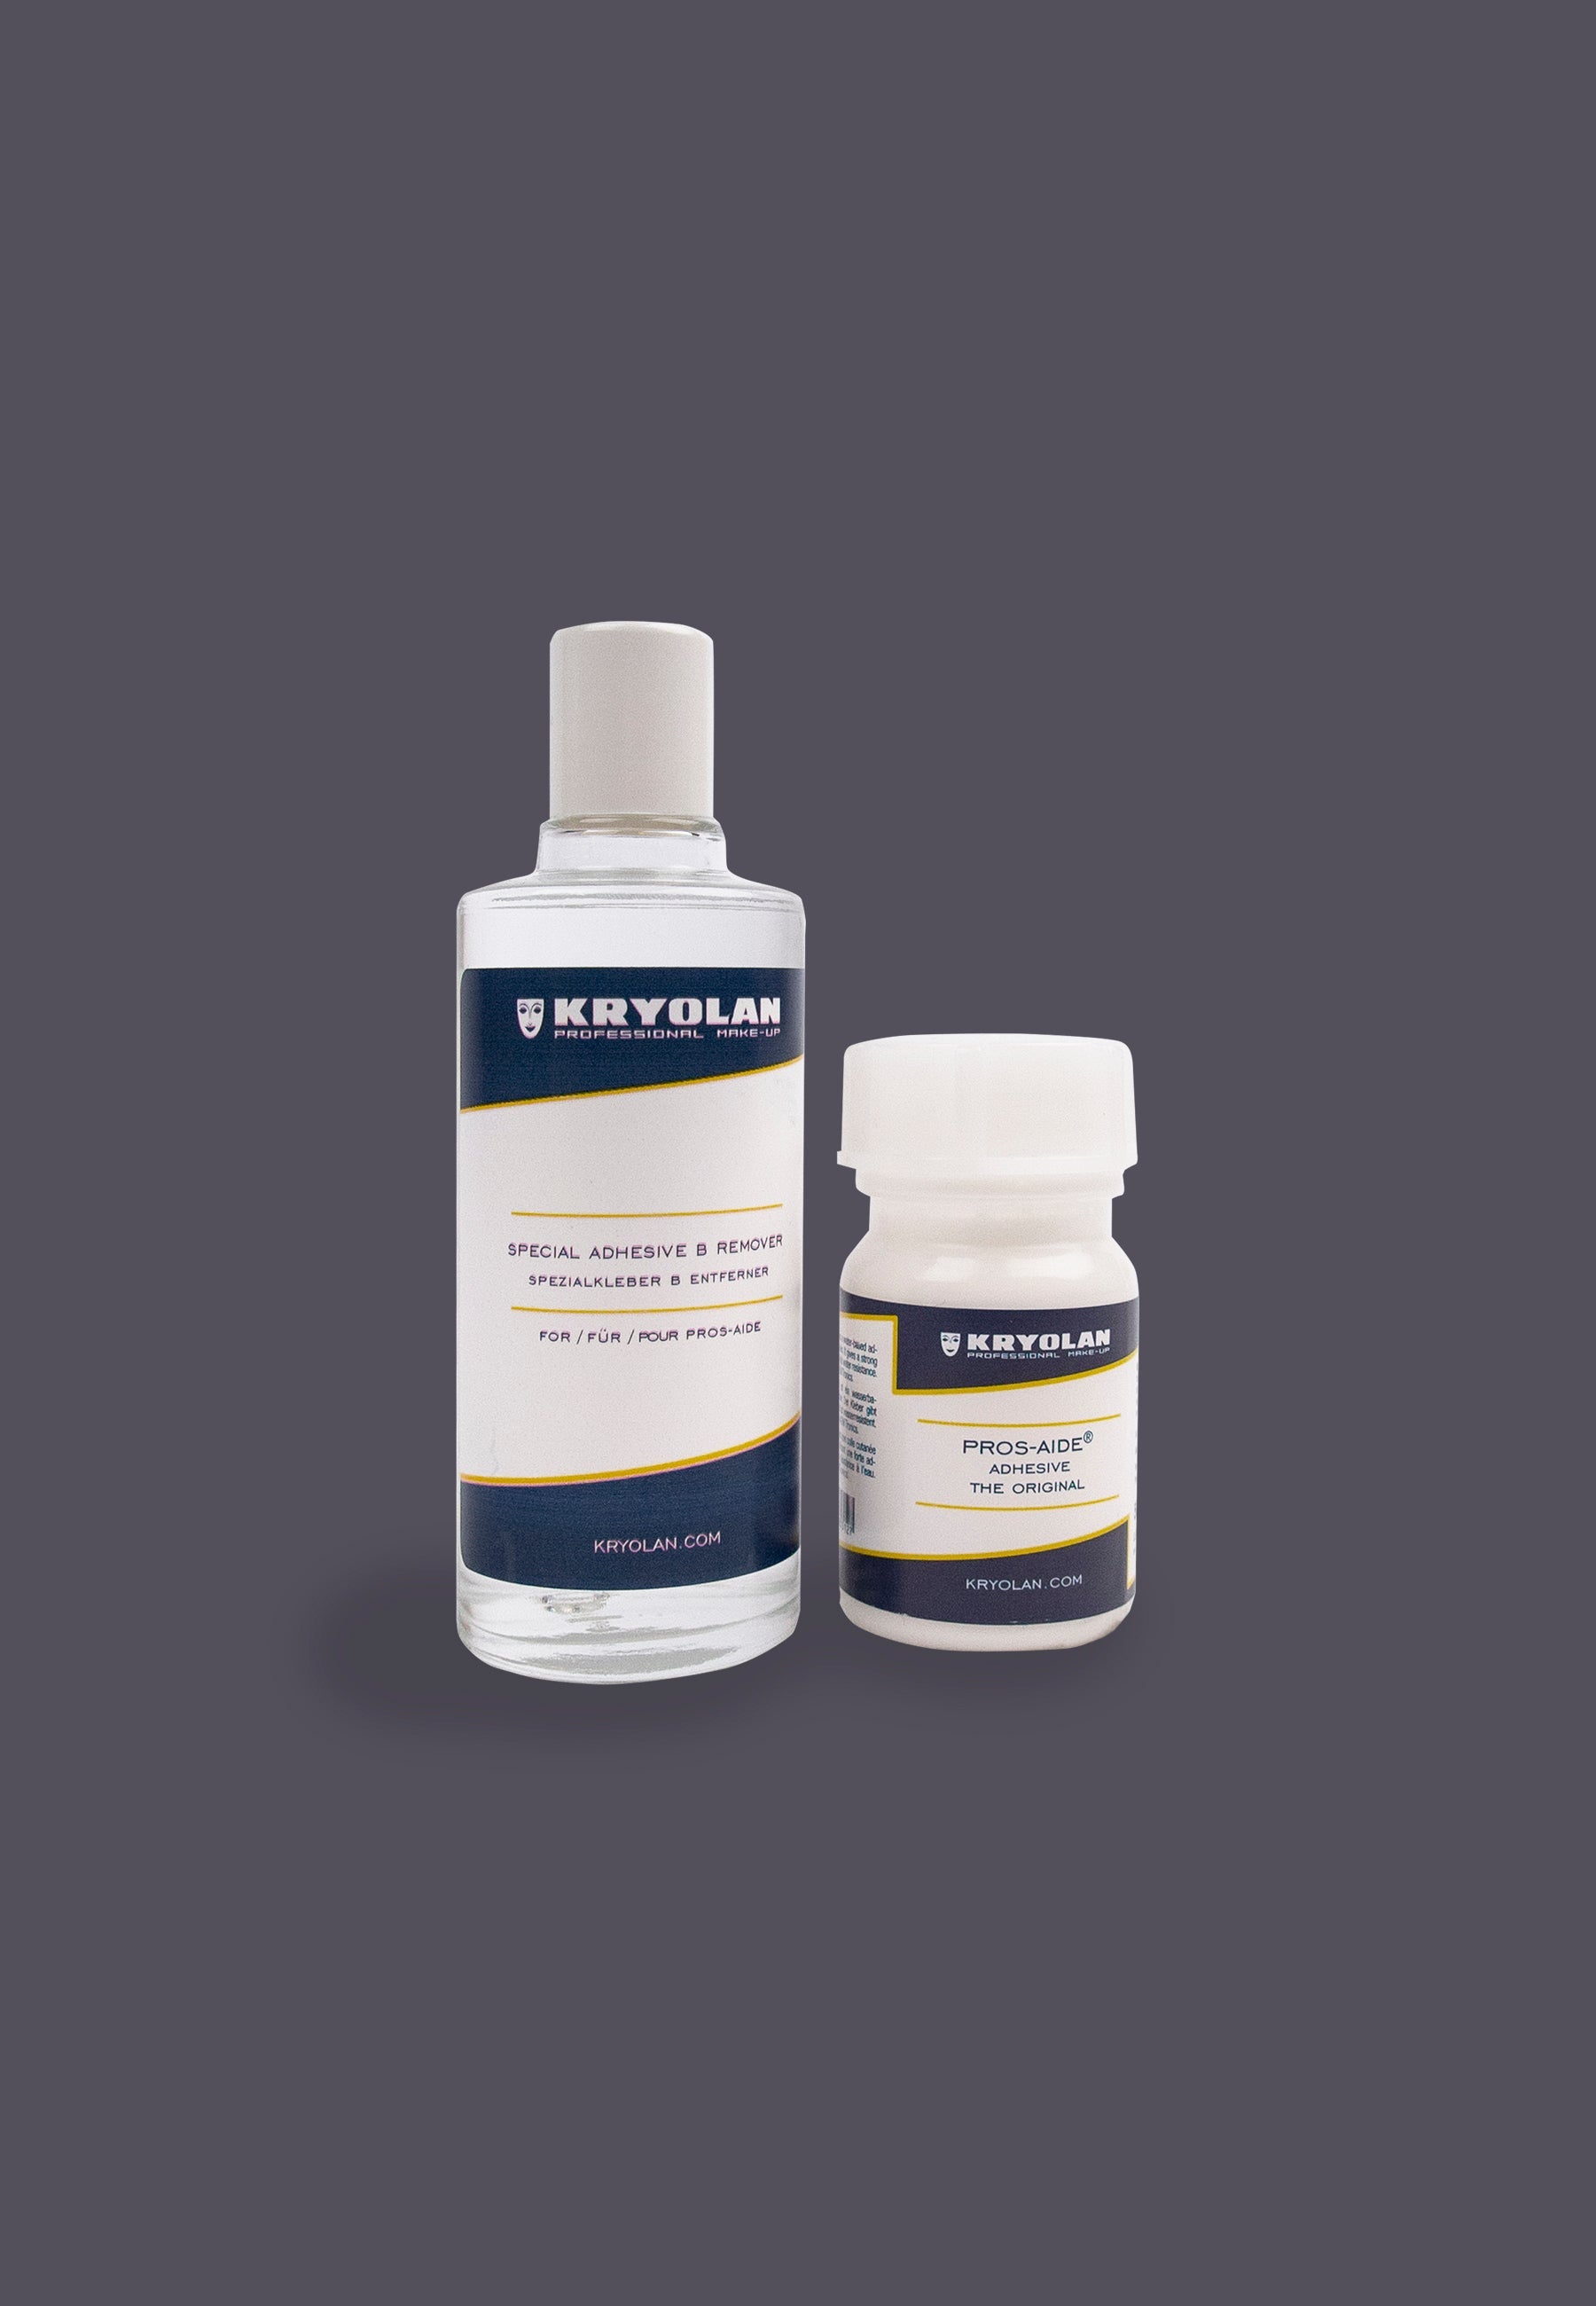 Kryolan Pros-Aide Remover and the glue